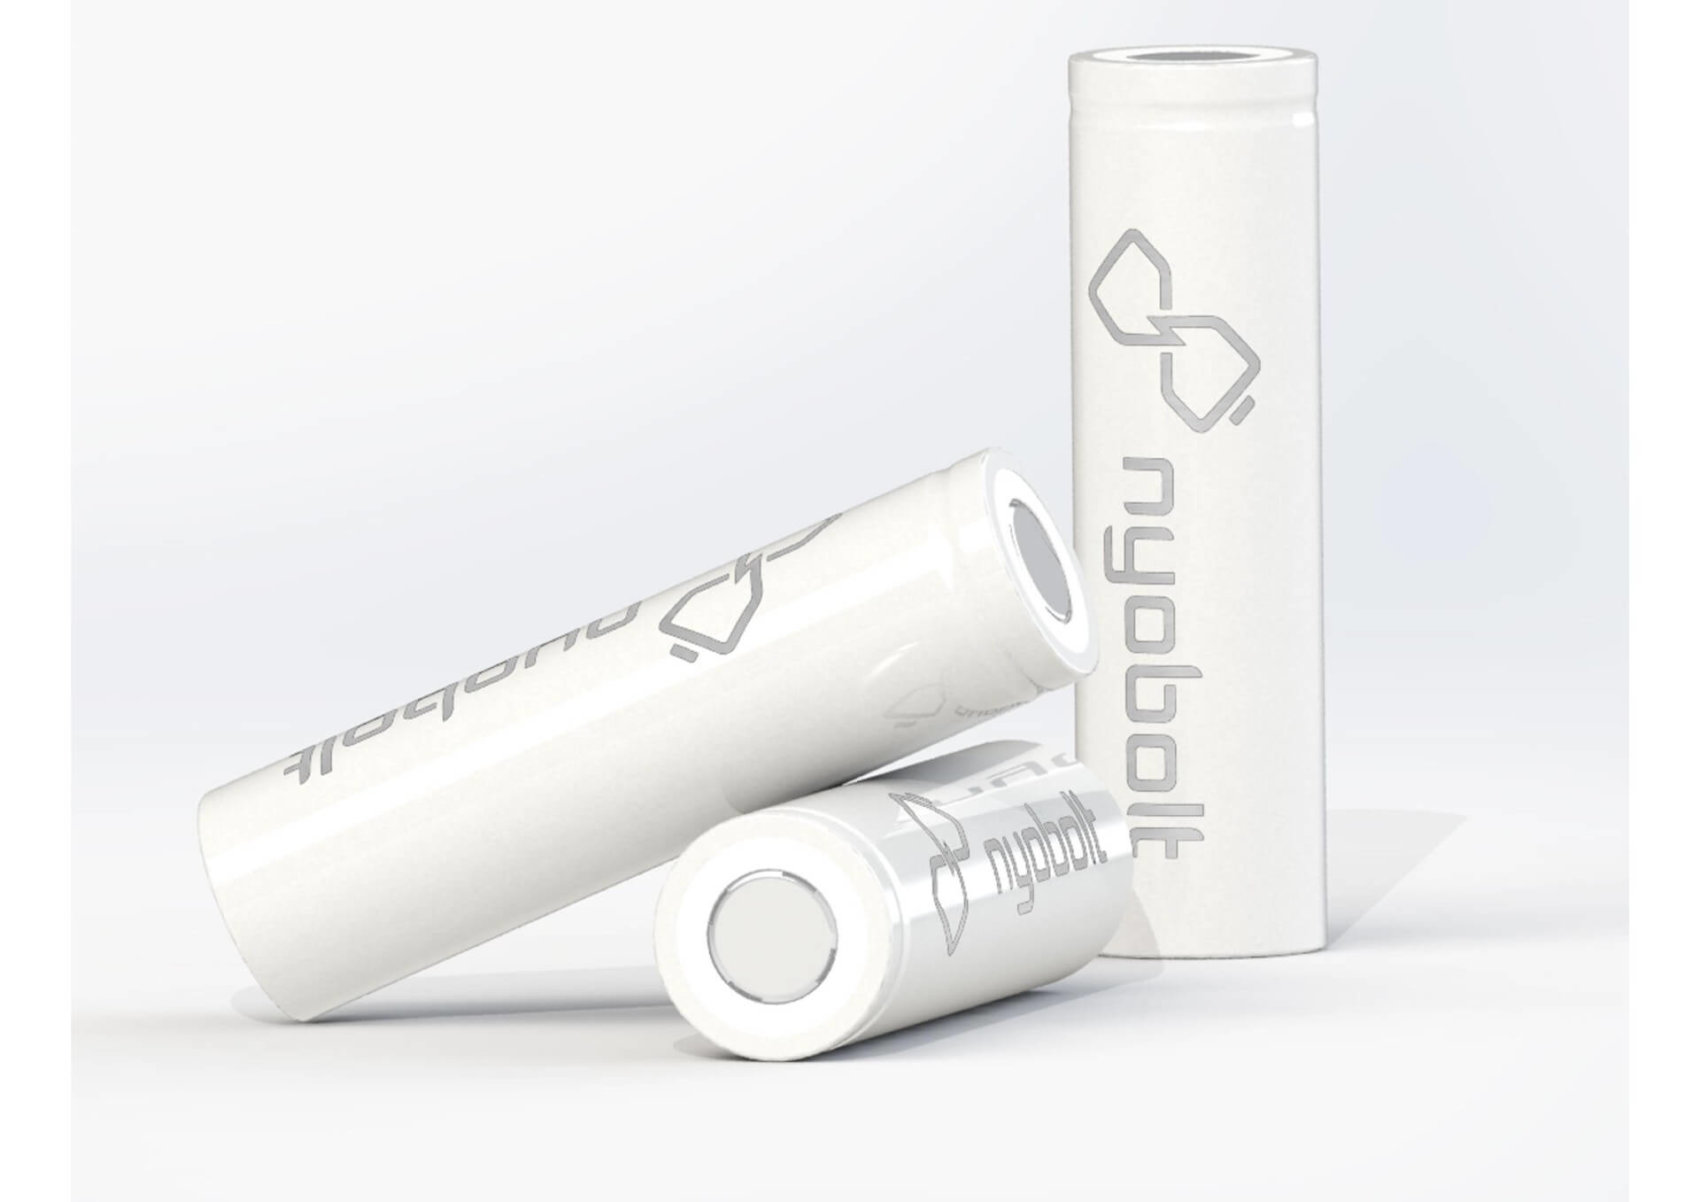 $10m Series A fundraise for state-of-the-art battery company Nyobolt